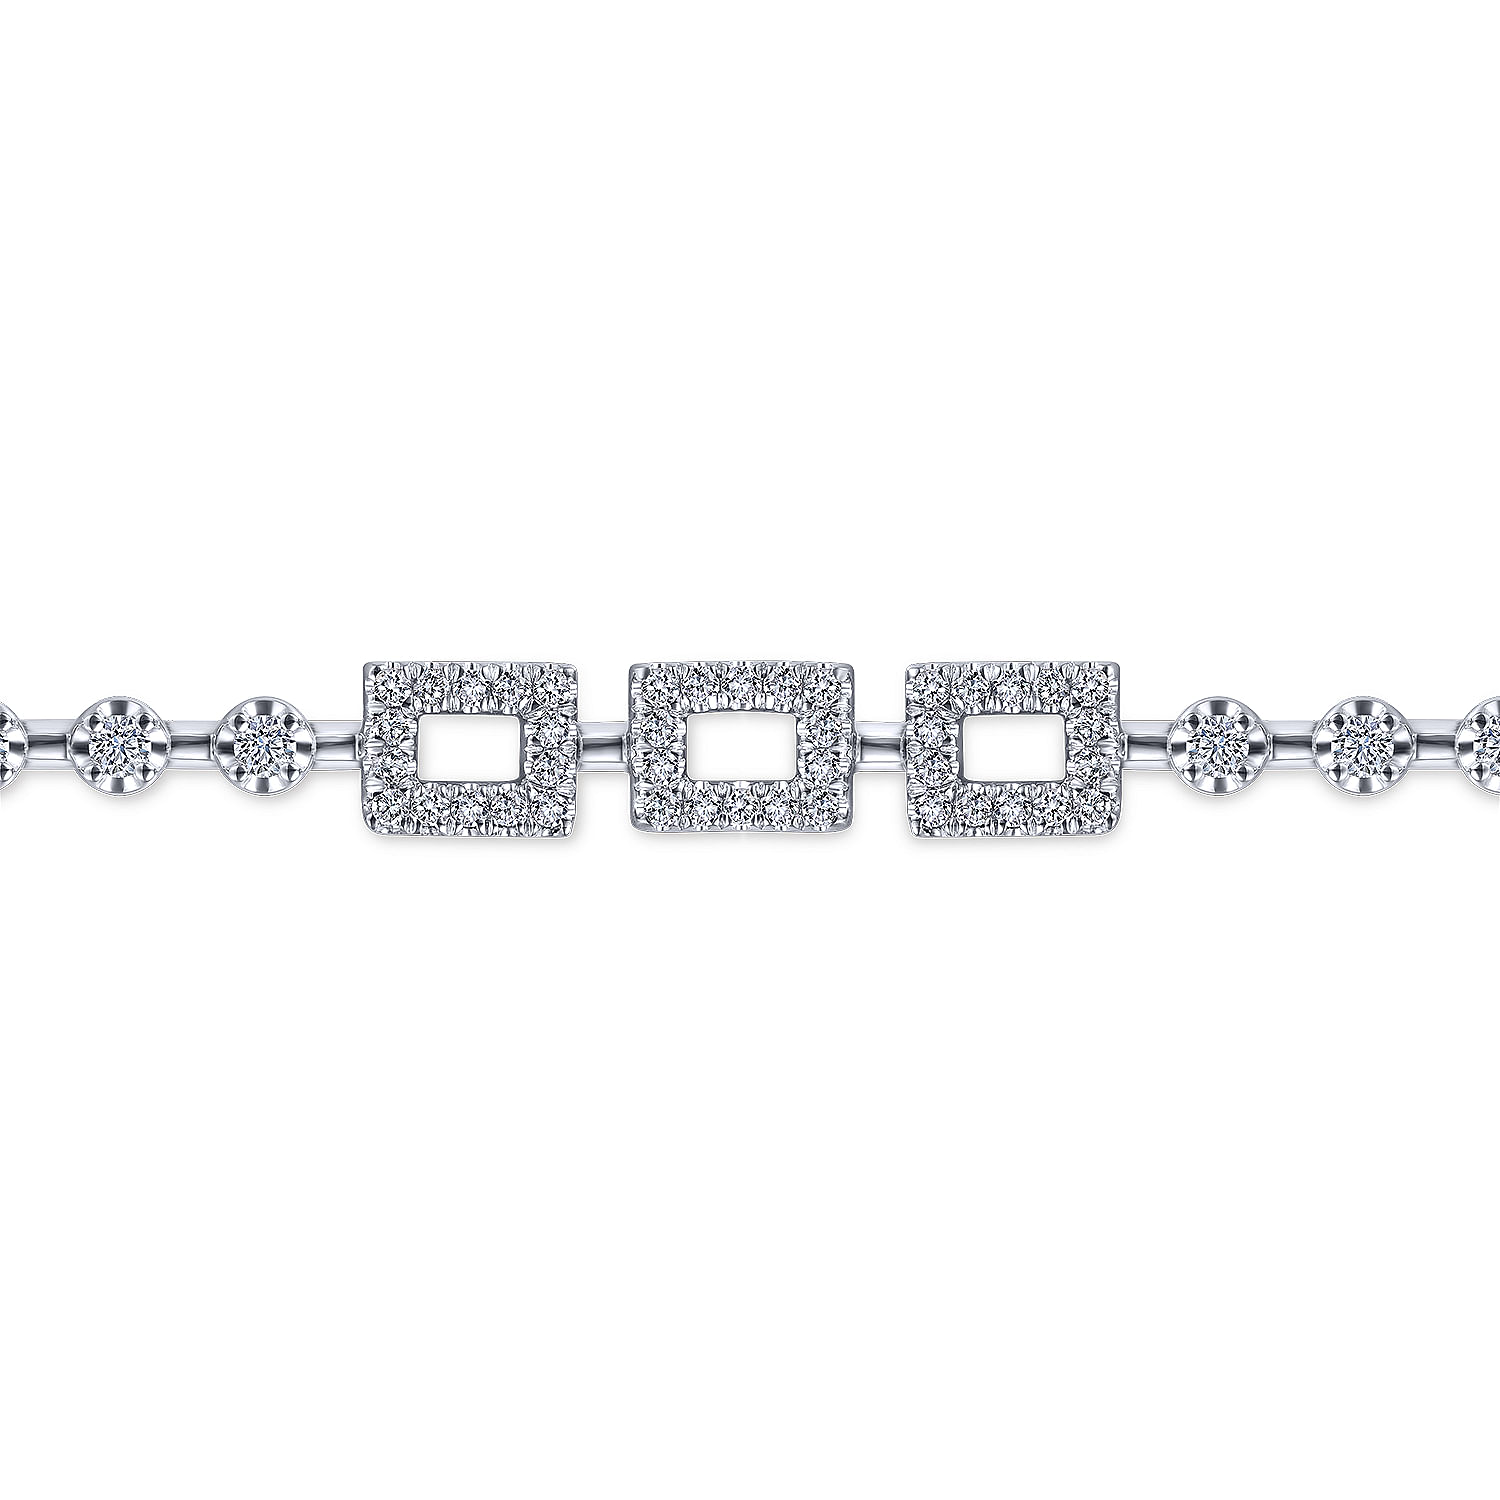 14K White Gold Buttercup Diamond Tennis Bracelet with Rectangle Stations